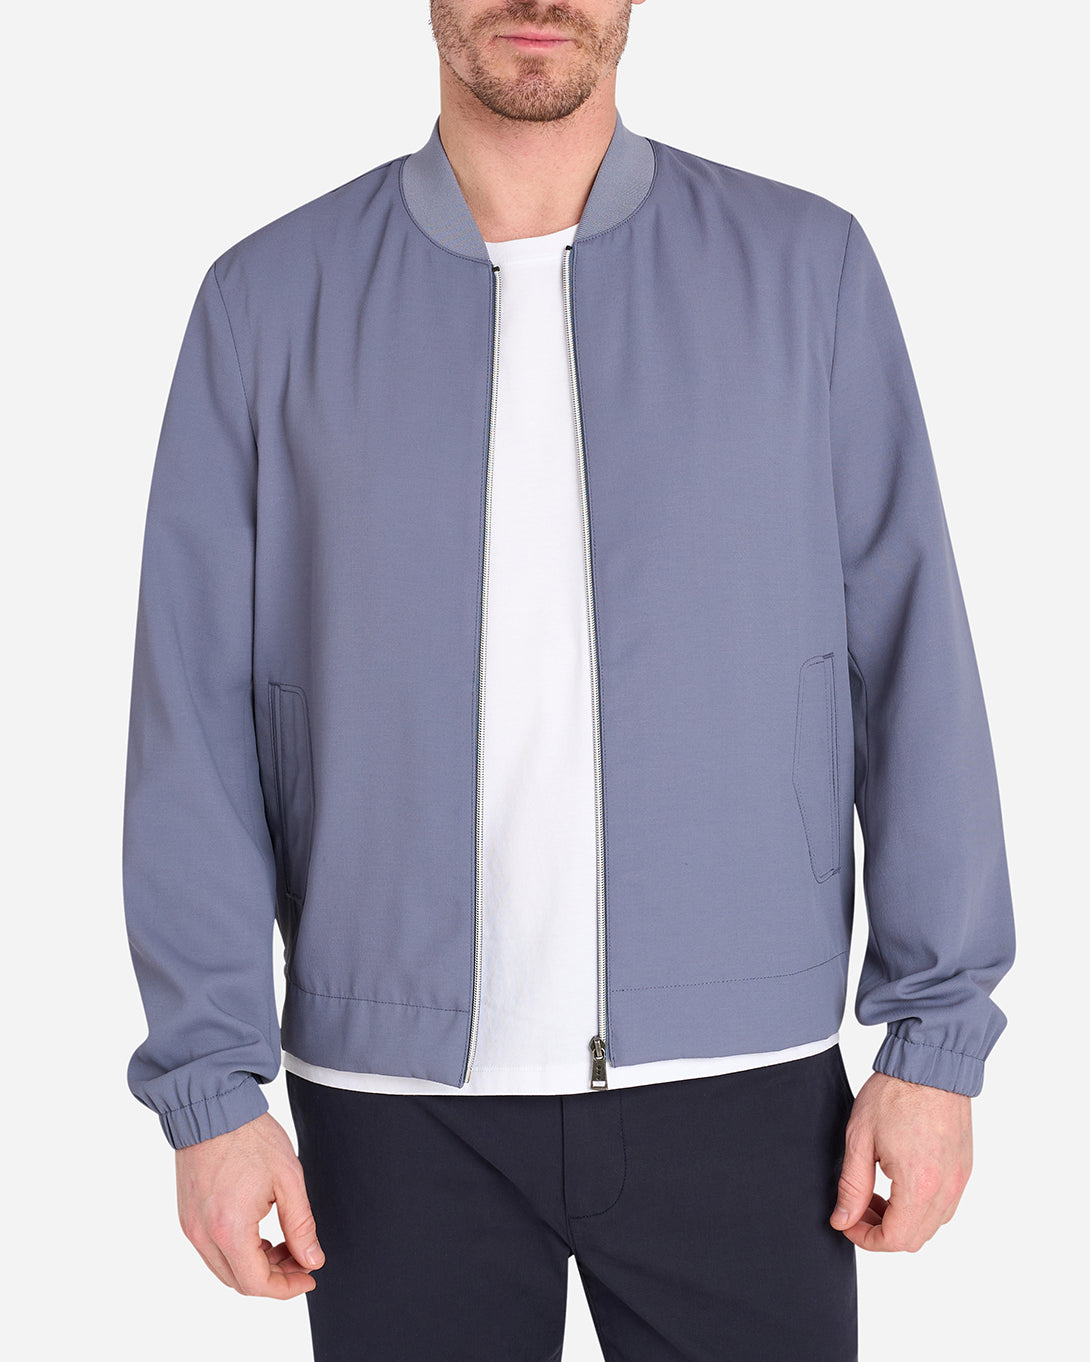 GRAY BLUE Dominic Bomber Twill Jacket Mens Summer Layering Outerwear